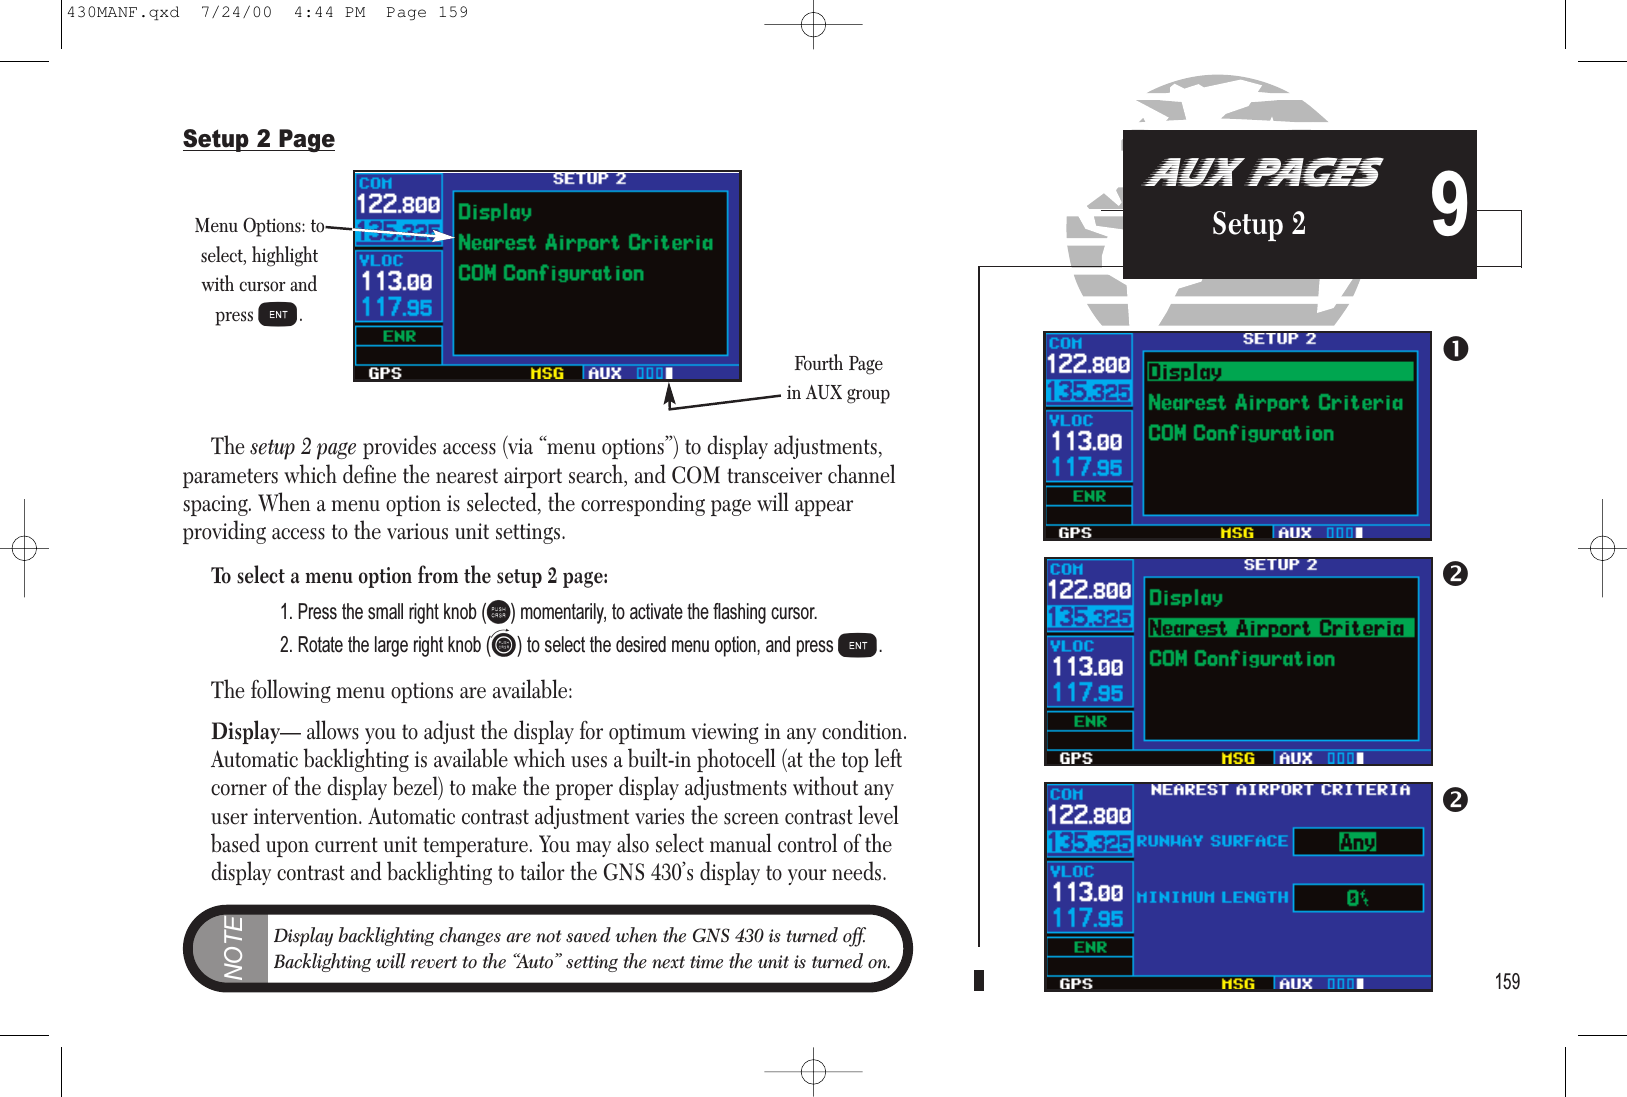 159AUX PAGESSetup 2 9Setup 2 PageThe setup 2 page provides access (via “menu options”) to display adjustments,parameters which define the nearest airport search, and COM transceiver channelspacing. When a menu option is selected, the corresponding page will appear providing access to the various unit settings.To select a menu option from the setup 2 page:1. Press the small right knob (r) momentarily, to activate the flashing cursor.2. Rotate the large right knob (d) to select the desired menu option, and press E.The following menu options are available:Display— allows you to adjust the display for optimum viewing in any condition.Automatic backlighting is available which uses a built-in photocell (at the top leftcorner of the display bezel) to make the proper display adjustments without anyuser intervention. Automatic contrast adjustment varies the screen contrast levelbased upon current unit temperature. You may also select manual control of thedisplay contrast and backlighting to tailor the GNS 430’s display to your needs.Menu Options: toselect, highlightwith cursor andpress E.Fourth Pagein AUX groupNOTEDisplay backlighting changes are not saved when the GNS 430 is turned off.Backlighting will revert to the “Auto” setting the next time the unit is turned on.430MANF.qxd  7/24/00  4:44 PM  Page 159